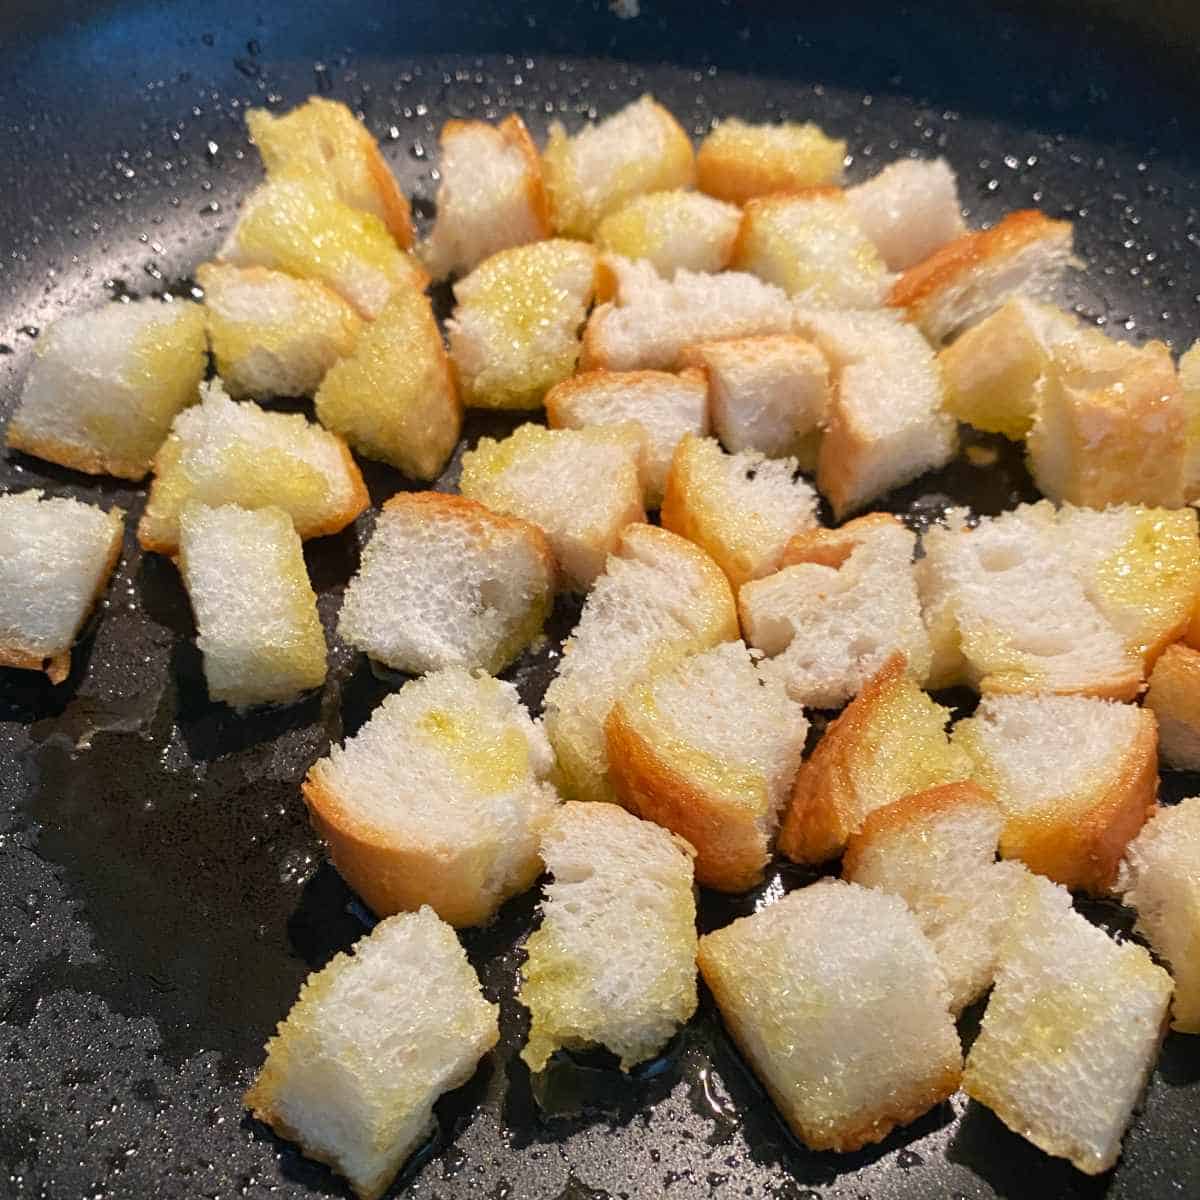 Small cubes of bread frying lighting in a fry pan to make croutons for Leak and Potato Soup.